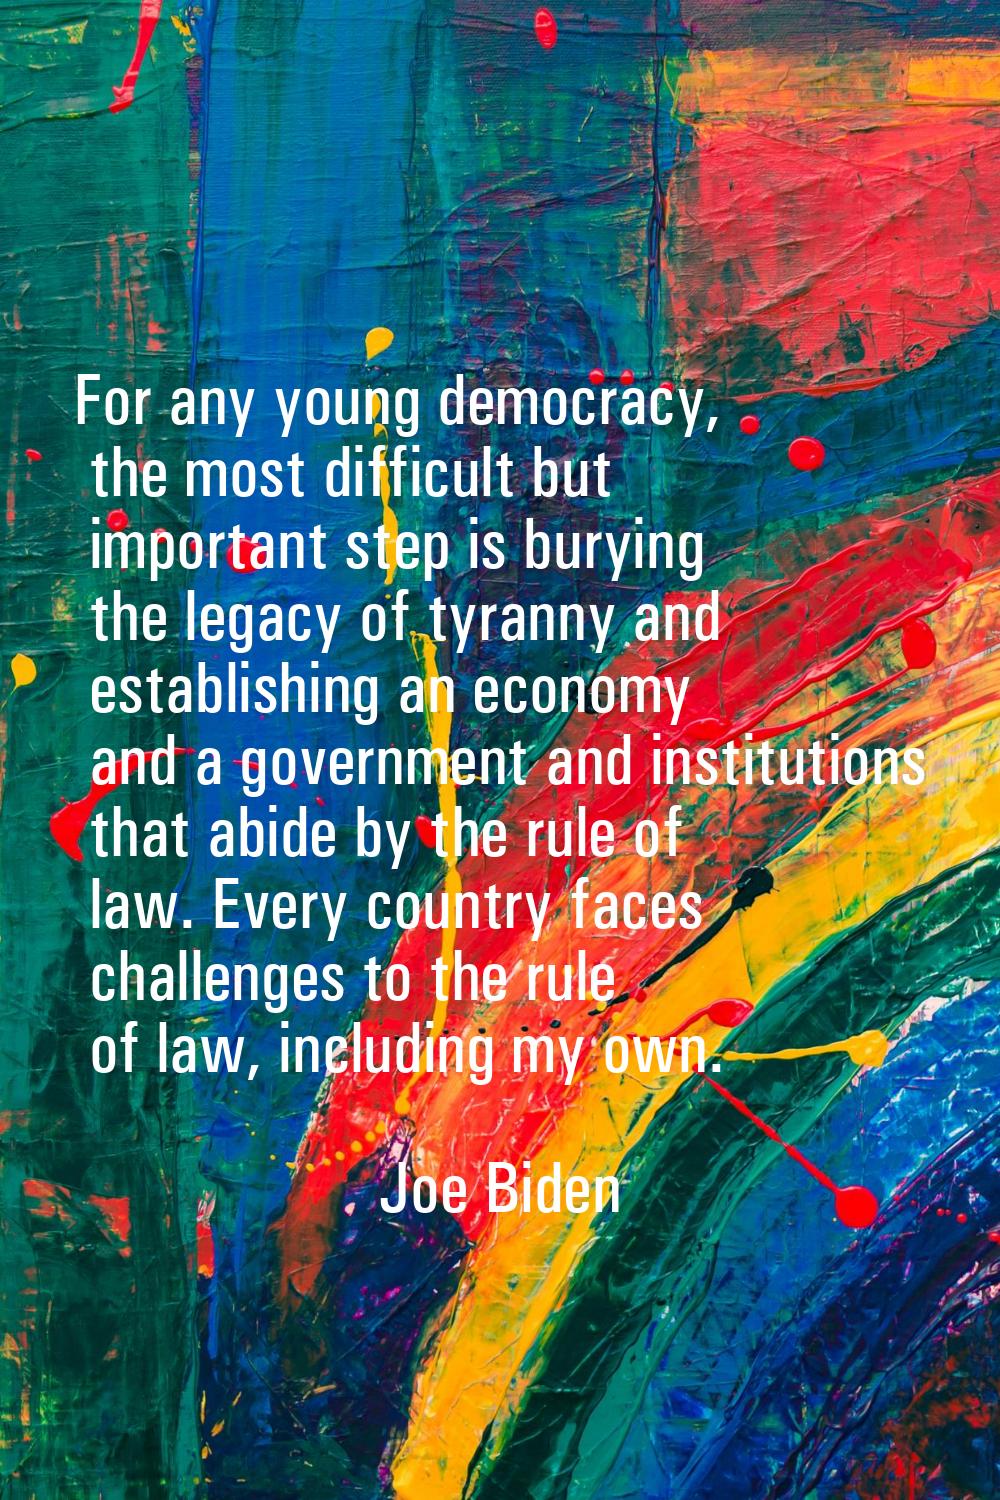 For any young democracy, the most difficult but important step is burying the legacy of tyranny and